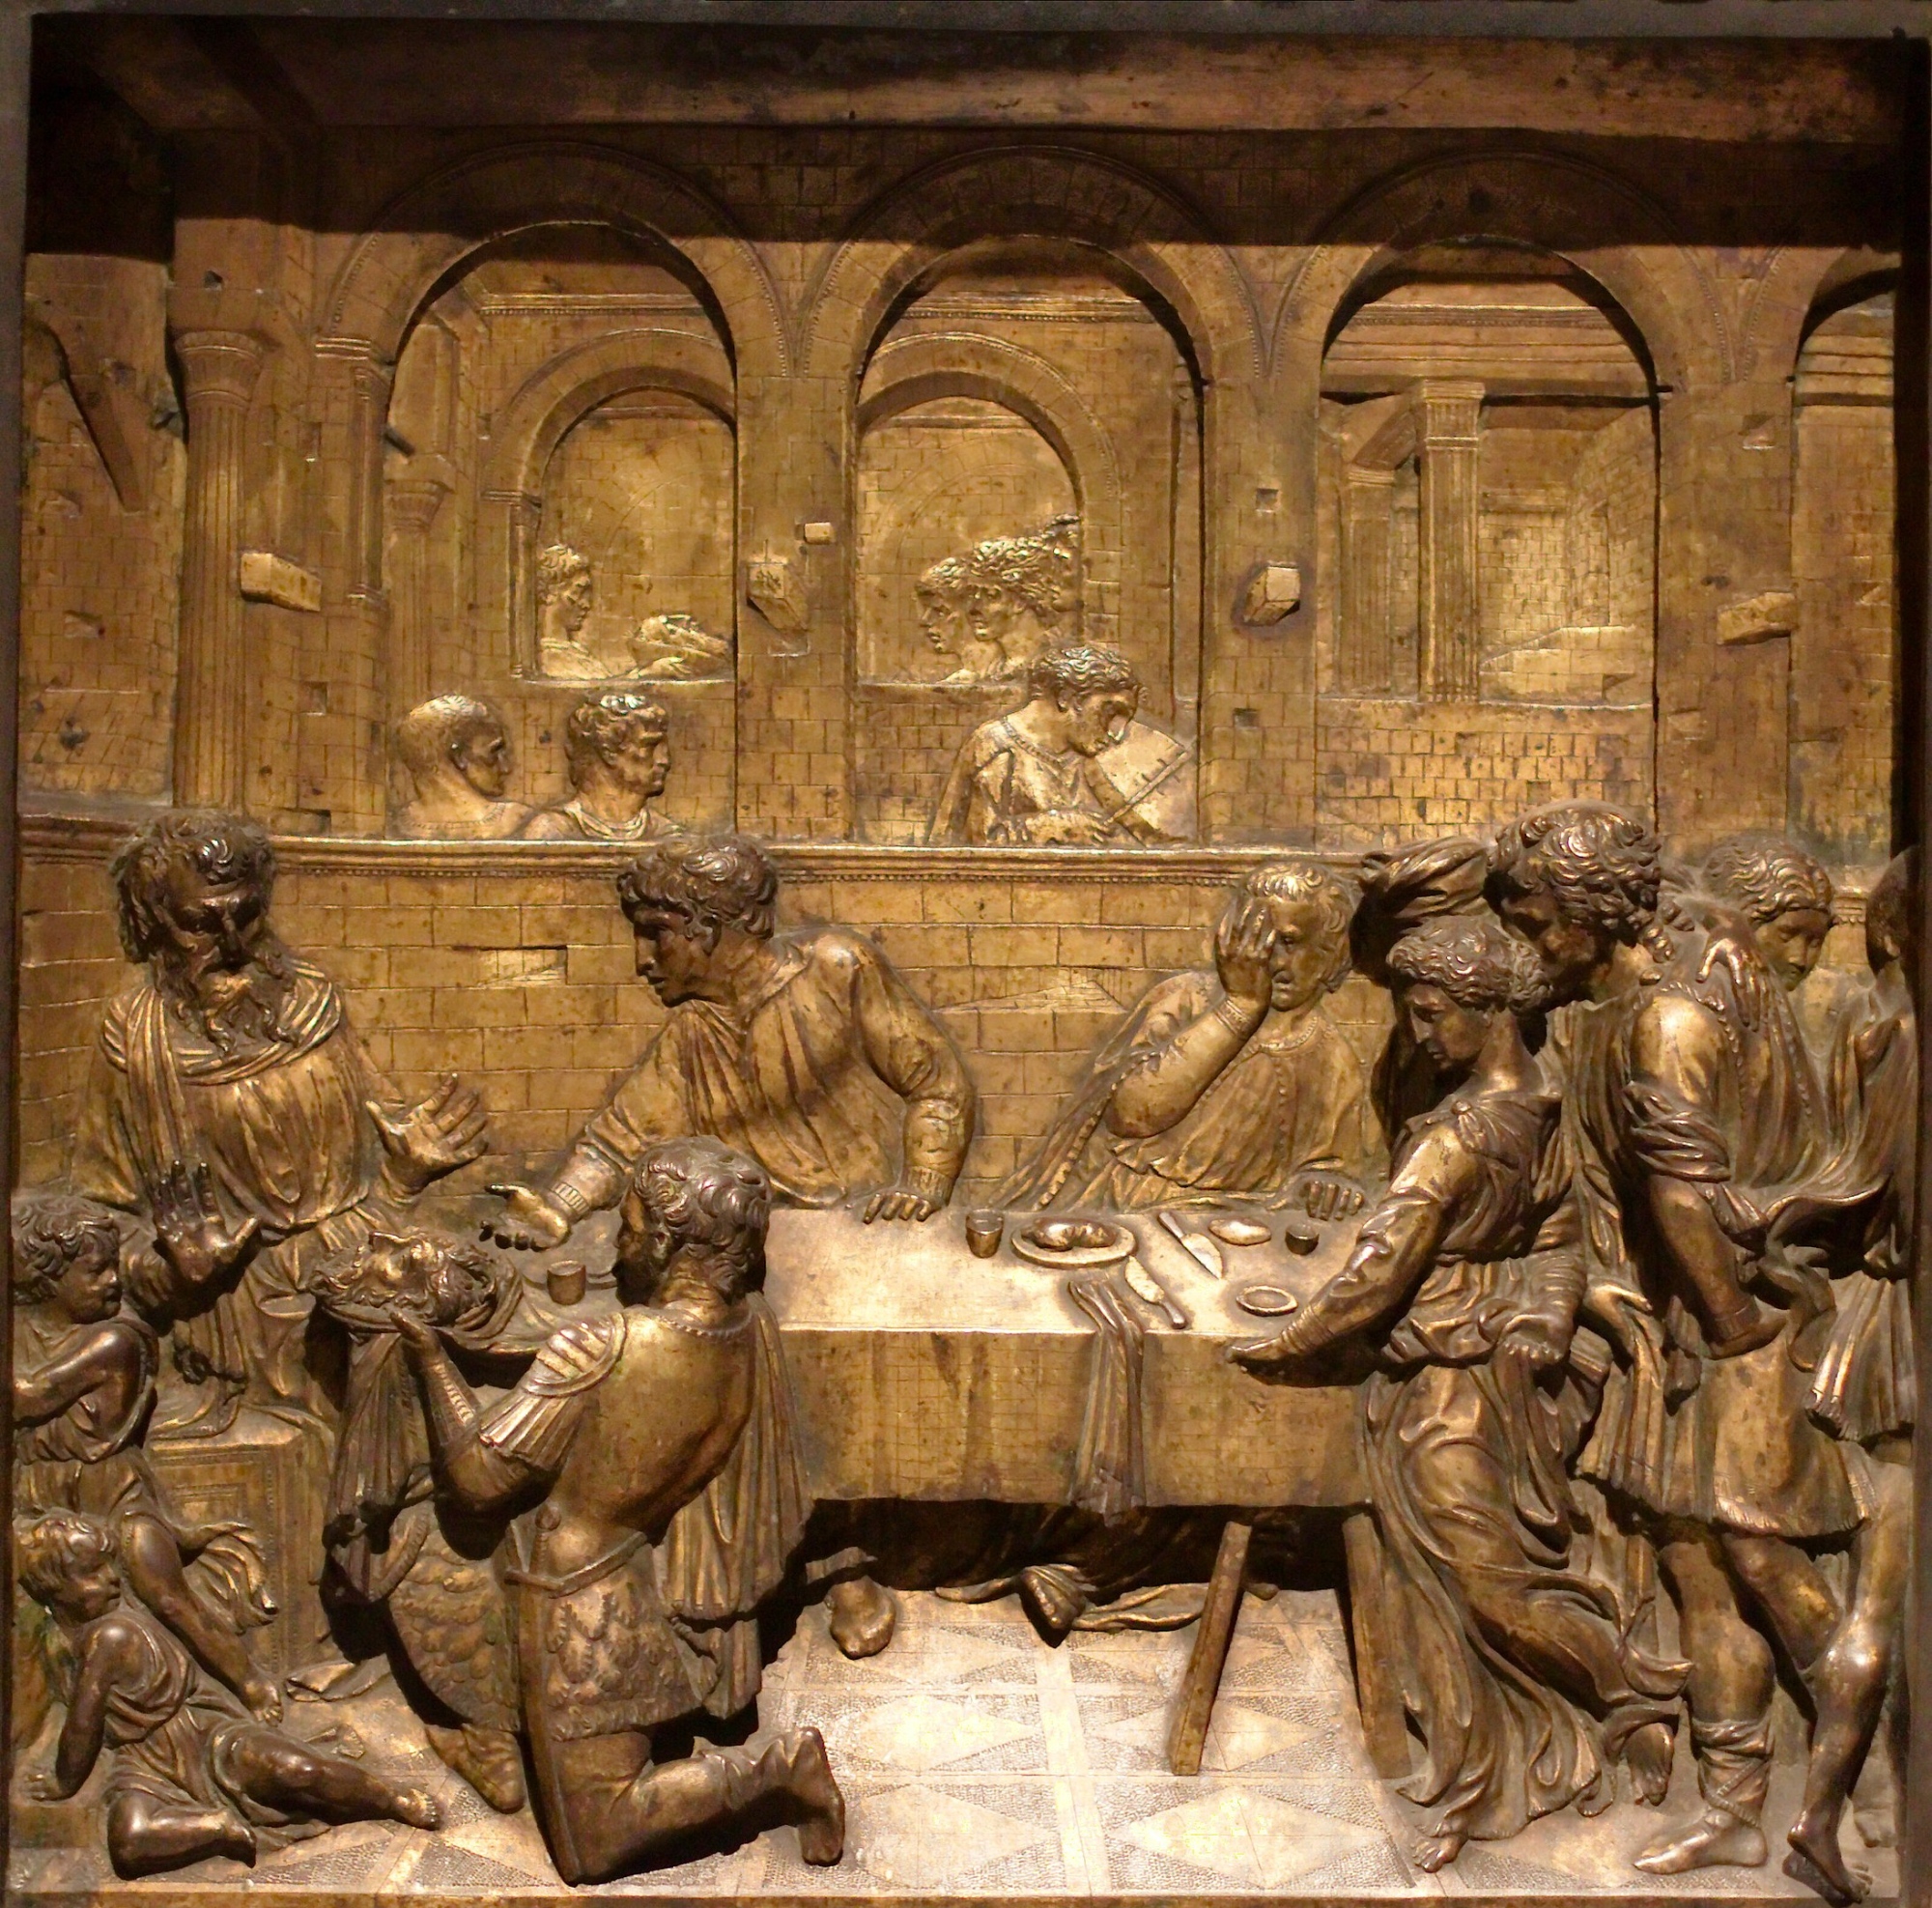 Herod's Banquet by Donatello on the Baptismal font in the San Giovanni Baptistery, Siena